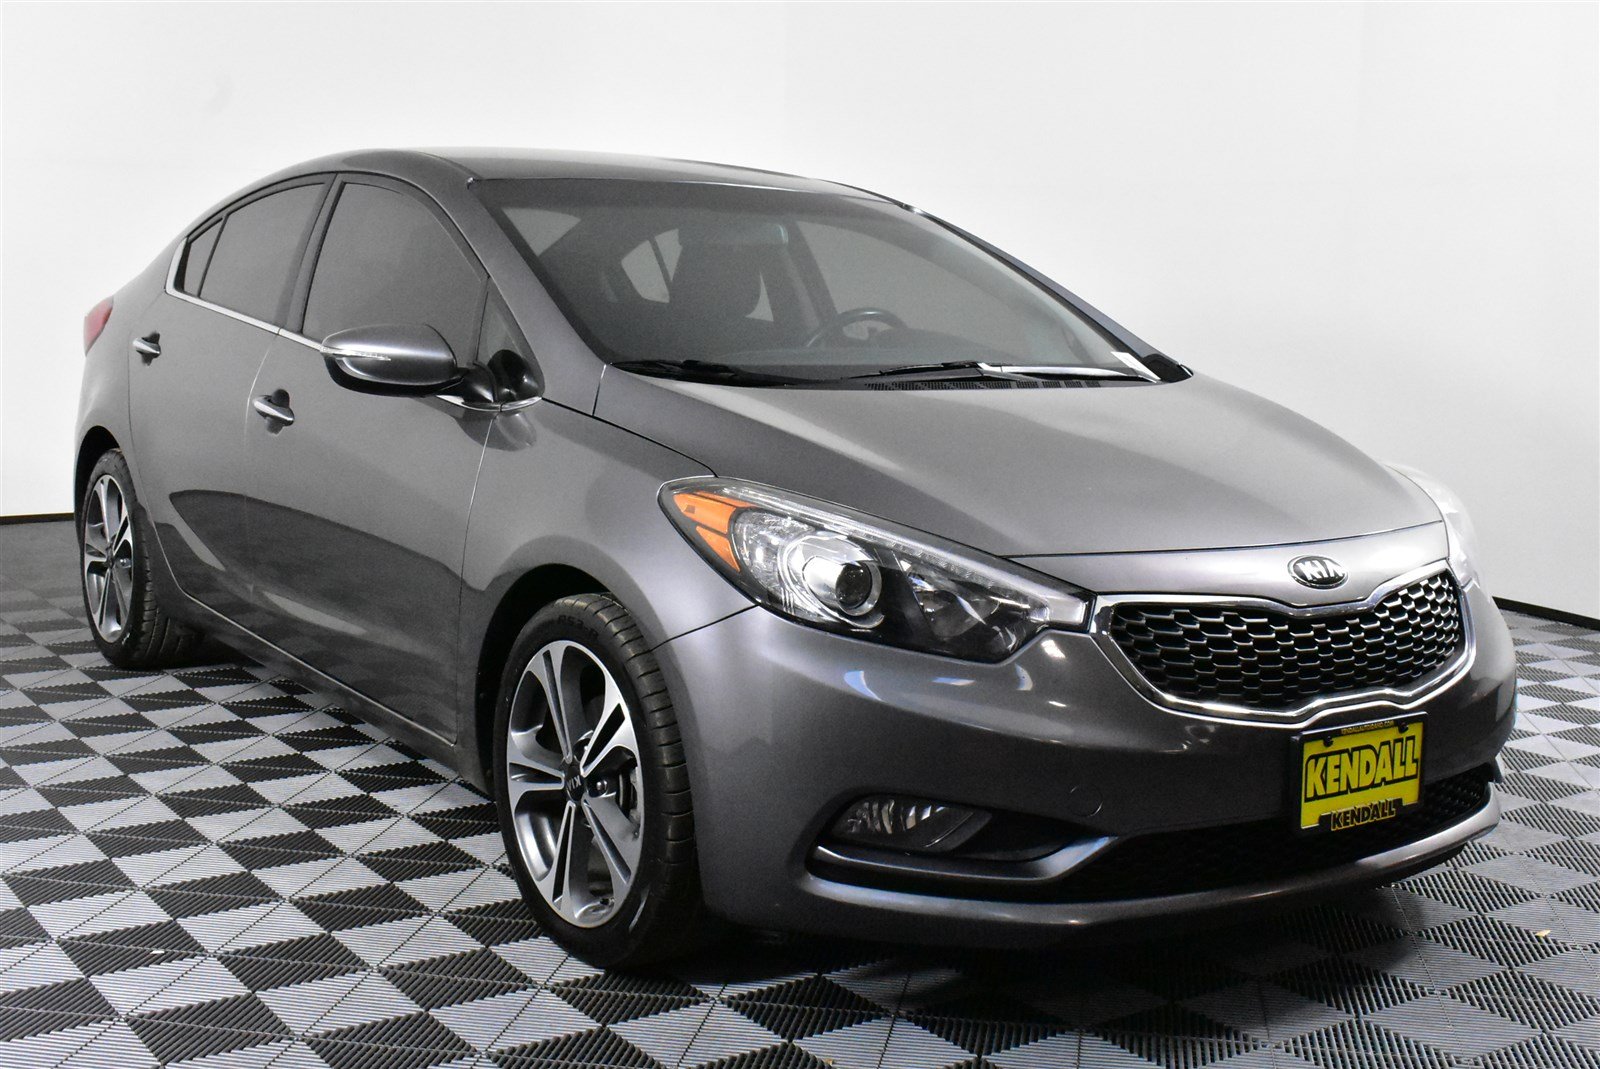 Certified Pre-Owned 2015 Kia Forte EX in Nampa #D980662A | Kendall Kia